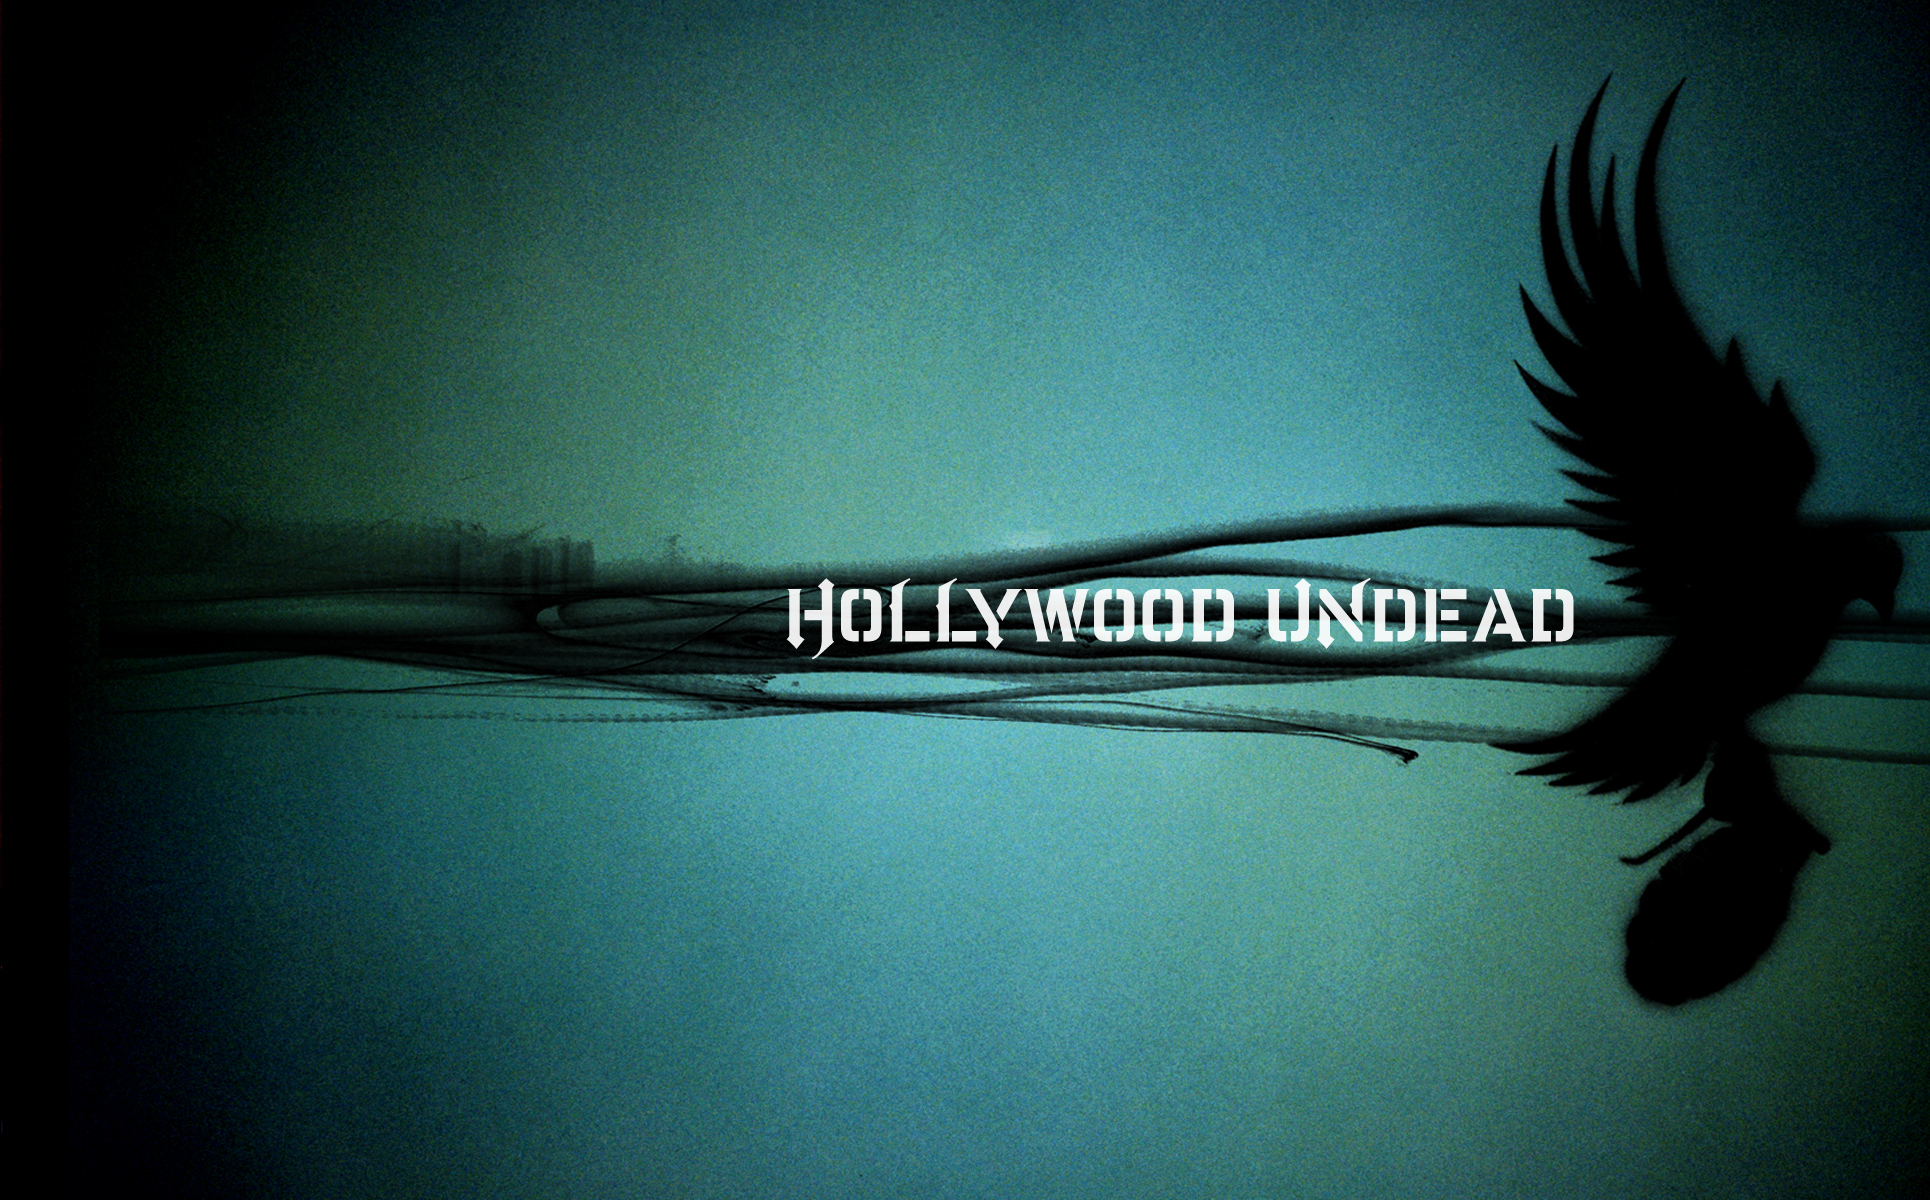 Pictures Dove grenade d g hollywood undead dove pigeon 1930x1200